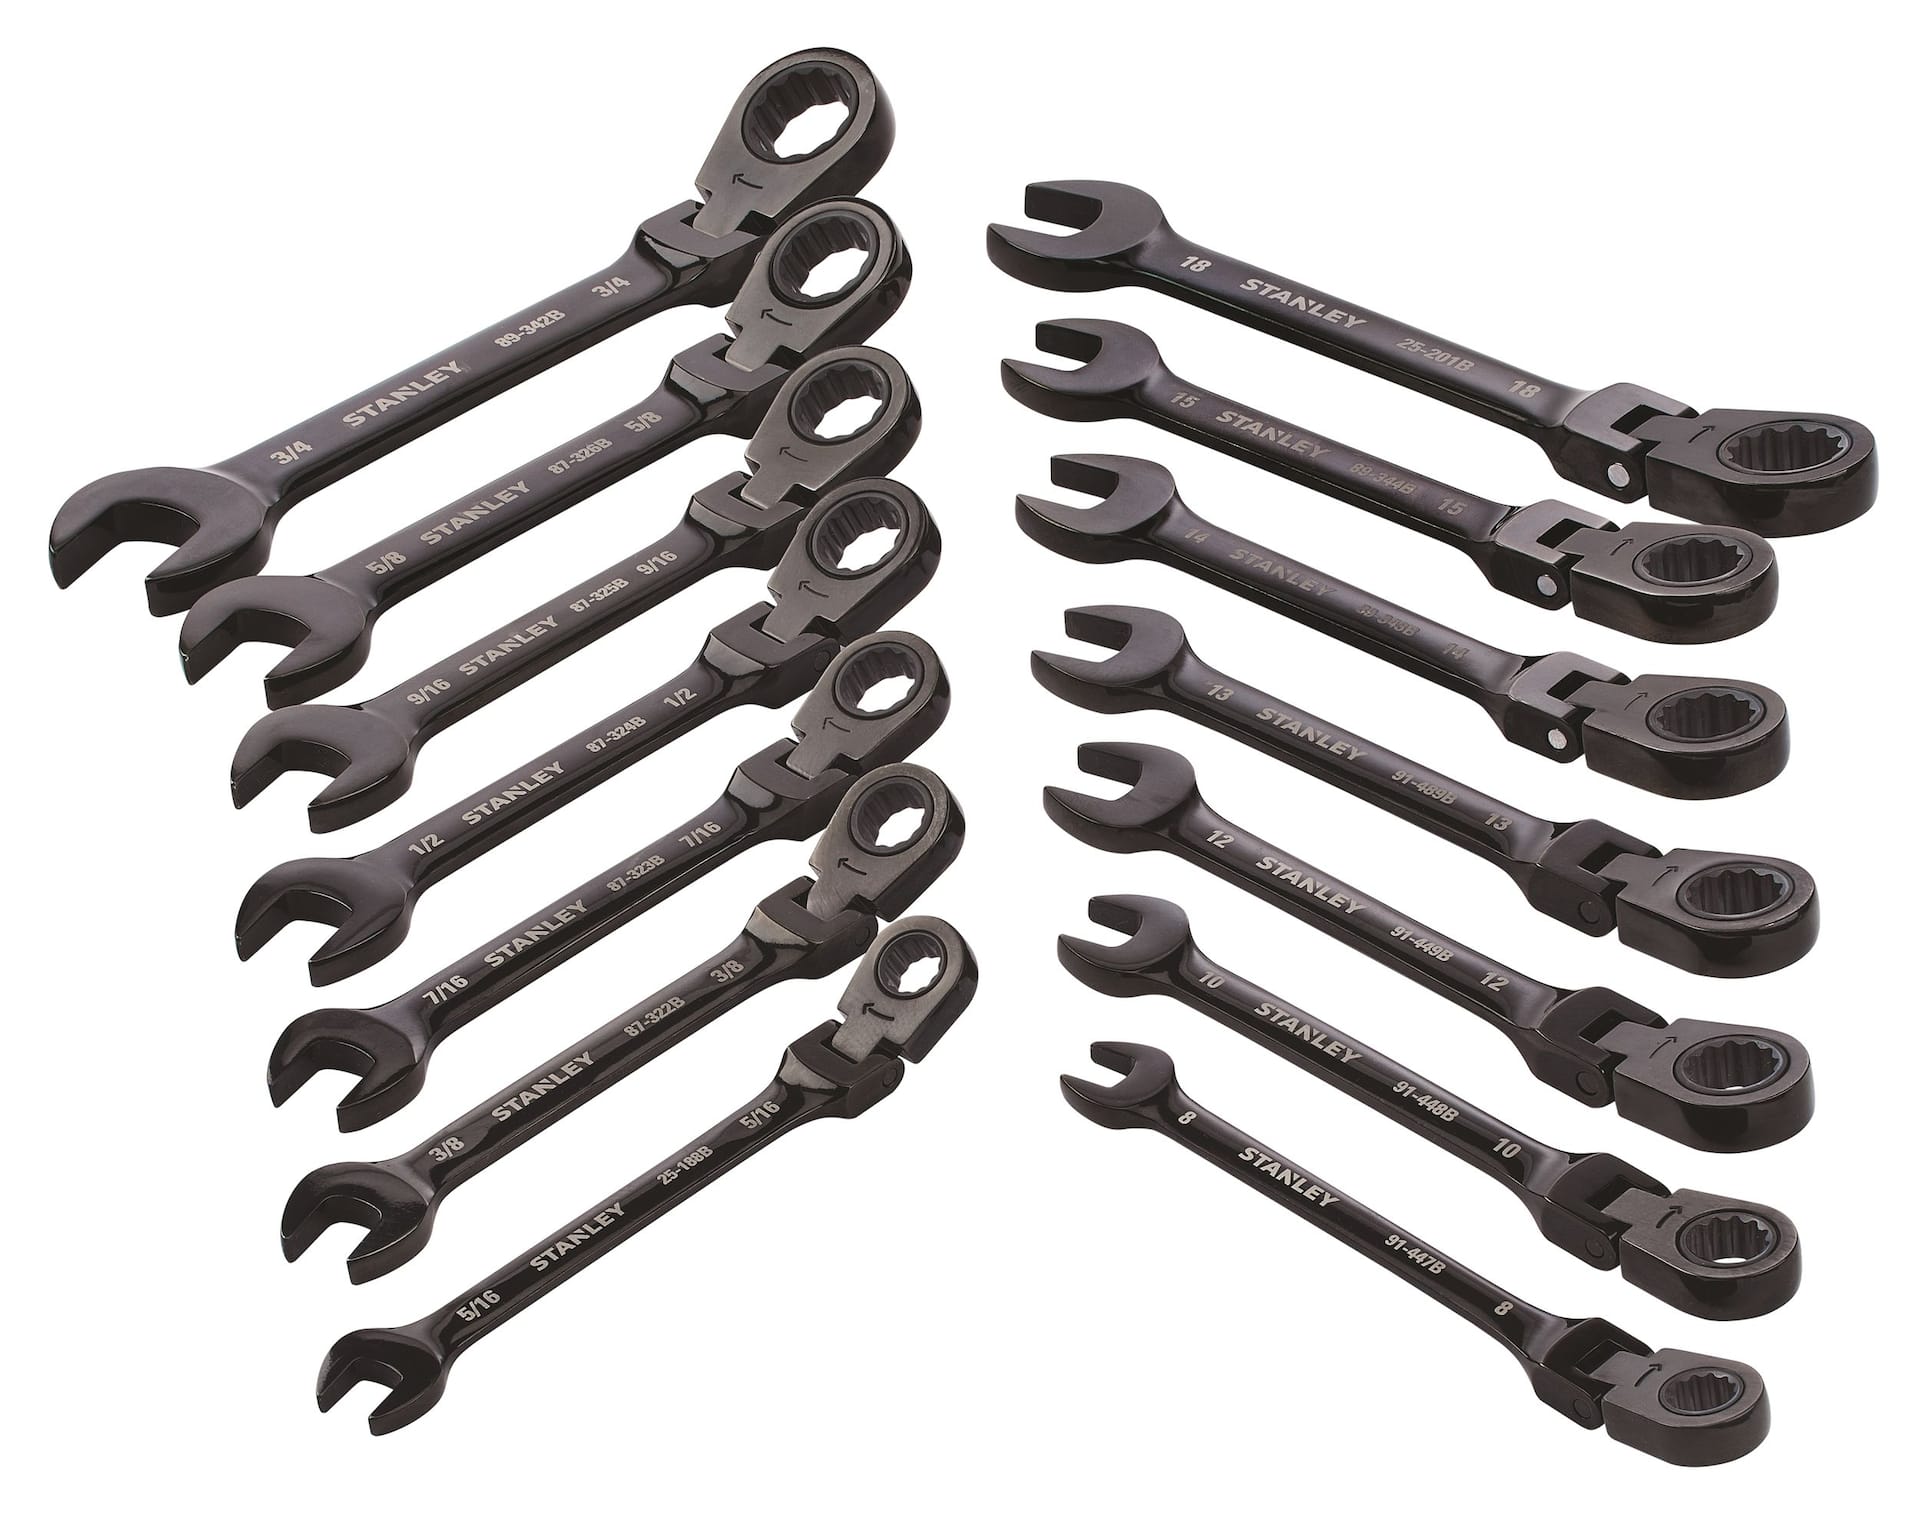 Stanley 70-965E Combination Spanner Set (Pack of 23) 70-395E Matte Finish  Shallow Offset Ring Spanner Set (Pack of 12) : Amazon.in: Home Improvement